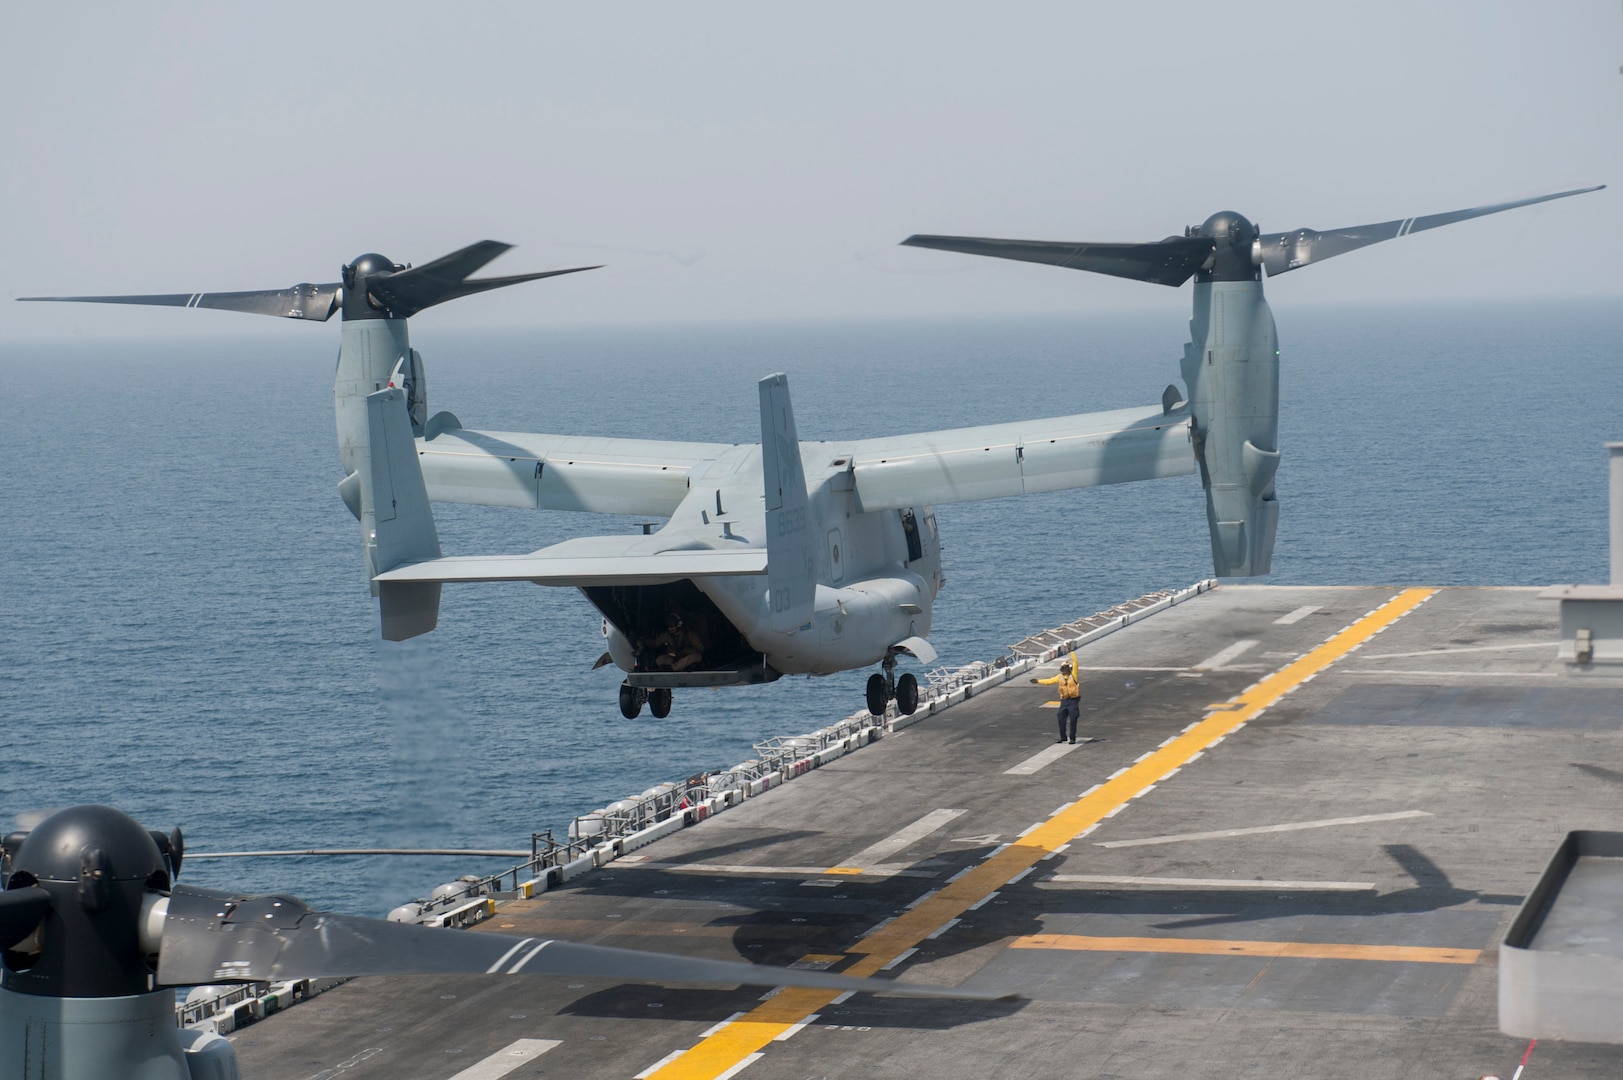 170906-N-ZS023-029 U.S. 5TH FLEET AREA OF RESPONSIBILITY (Sept. 6, 2017)An MV-22 Osprey assigned to Marine Medium Tiltrotor Squadron (VMM) 161 (Reinforced) lifts off from the flight deck of the amphibious assault ship USS America (LHA 6) in support of exercise Alligator Dagger 2017. Alligator Dagger is a dedicated, unilateral combat rehearsal led by Naval Amphibious Force, Task Force 51/5th Marine Expeditionary Brigade, in which combined Navy and Marine Corps units of the America Amphibious Ready Group and embarked 15th Marine Expeditionary Unit are to practice, rehearse and exercise integrated capabilities that are available to U.S. Central Command both afloat and ashore. (U.S. Navy photo by Mass Communication Specialist Seaman Vance Hand/Released)